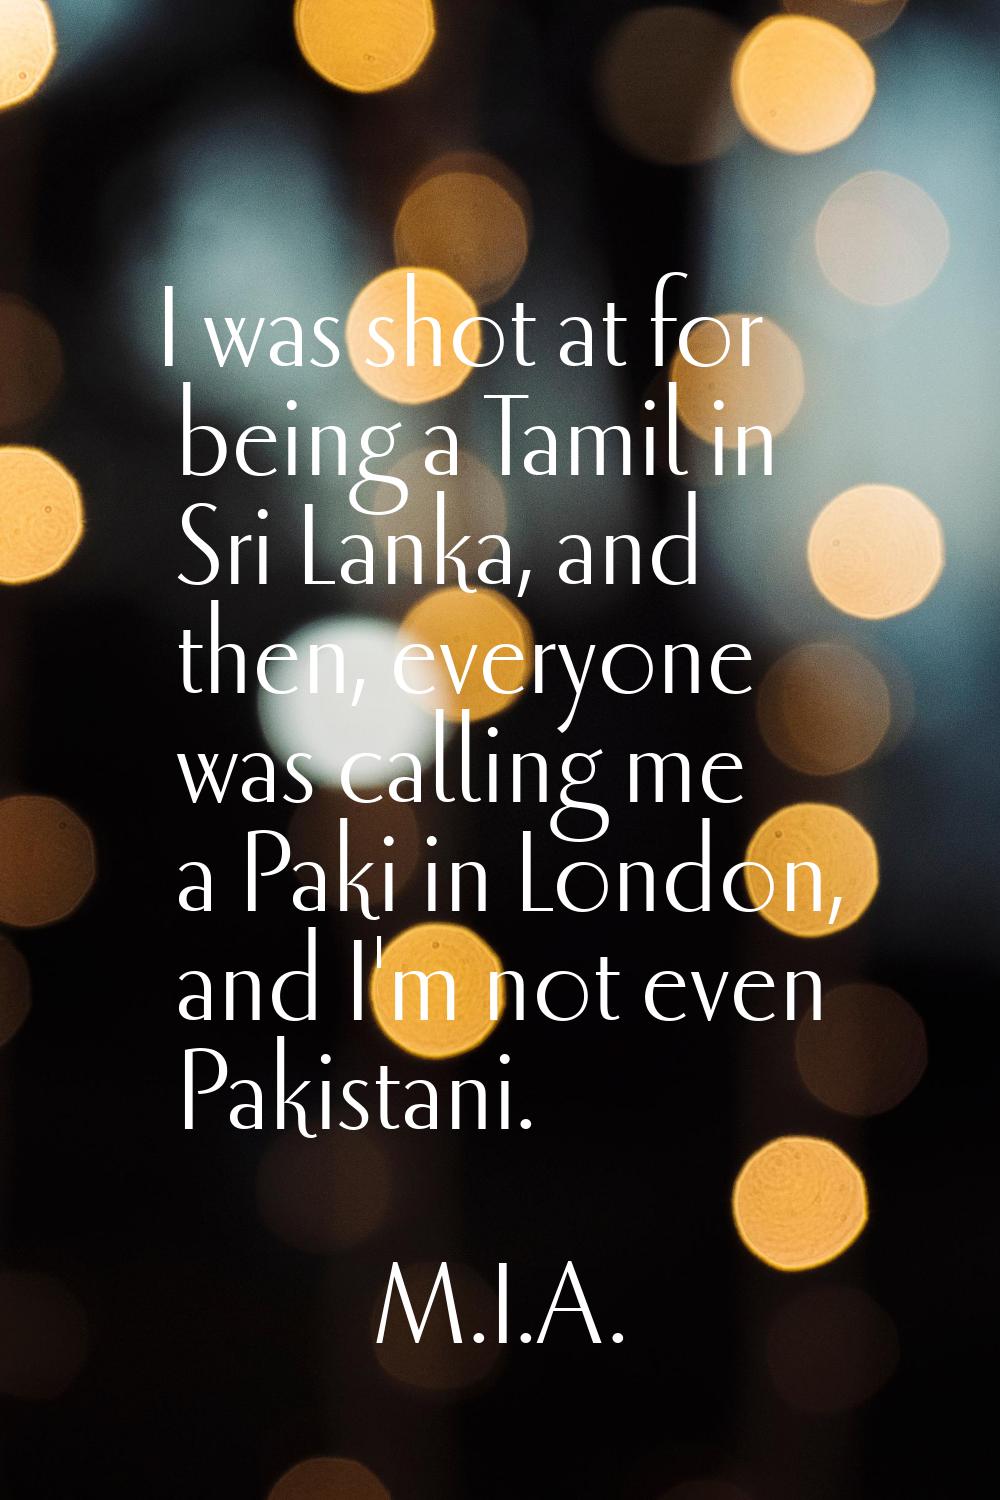 I was shot at for being a Tamil in Sri Lanka, and then, everyone was calling me a Paki in London, a